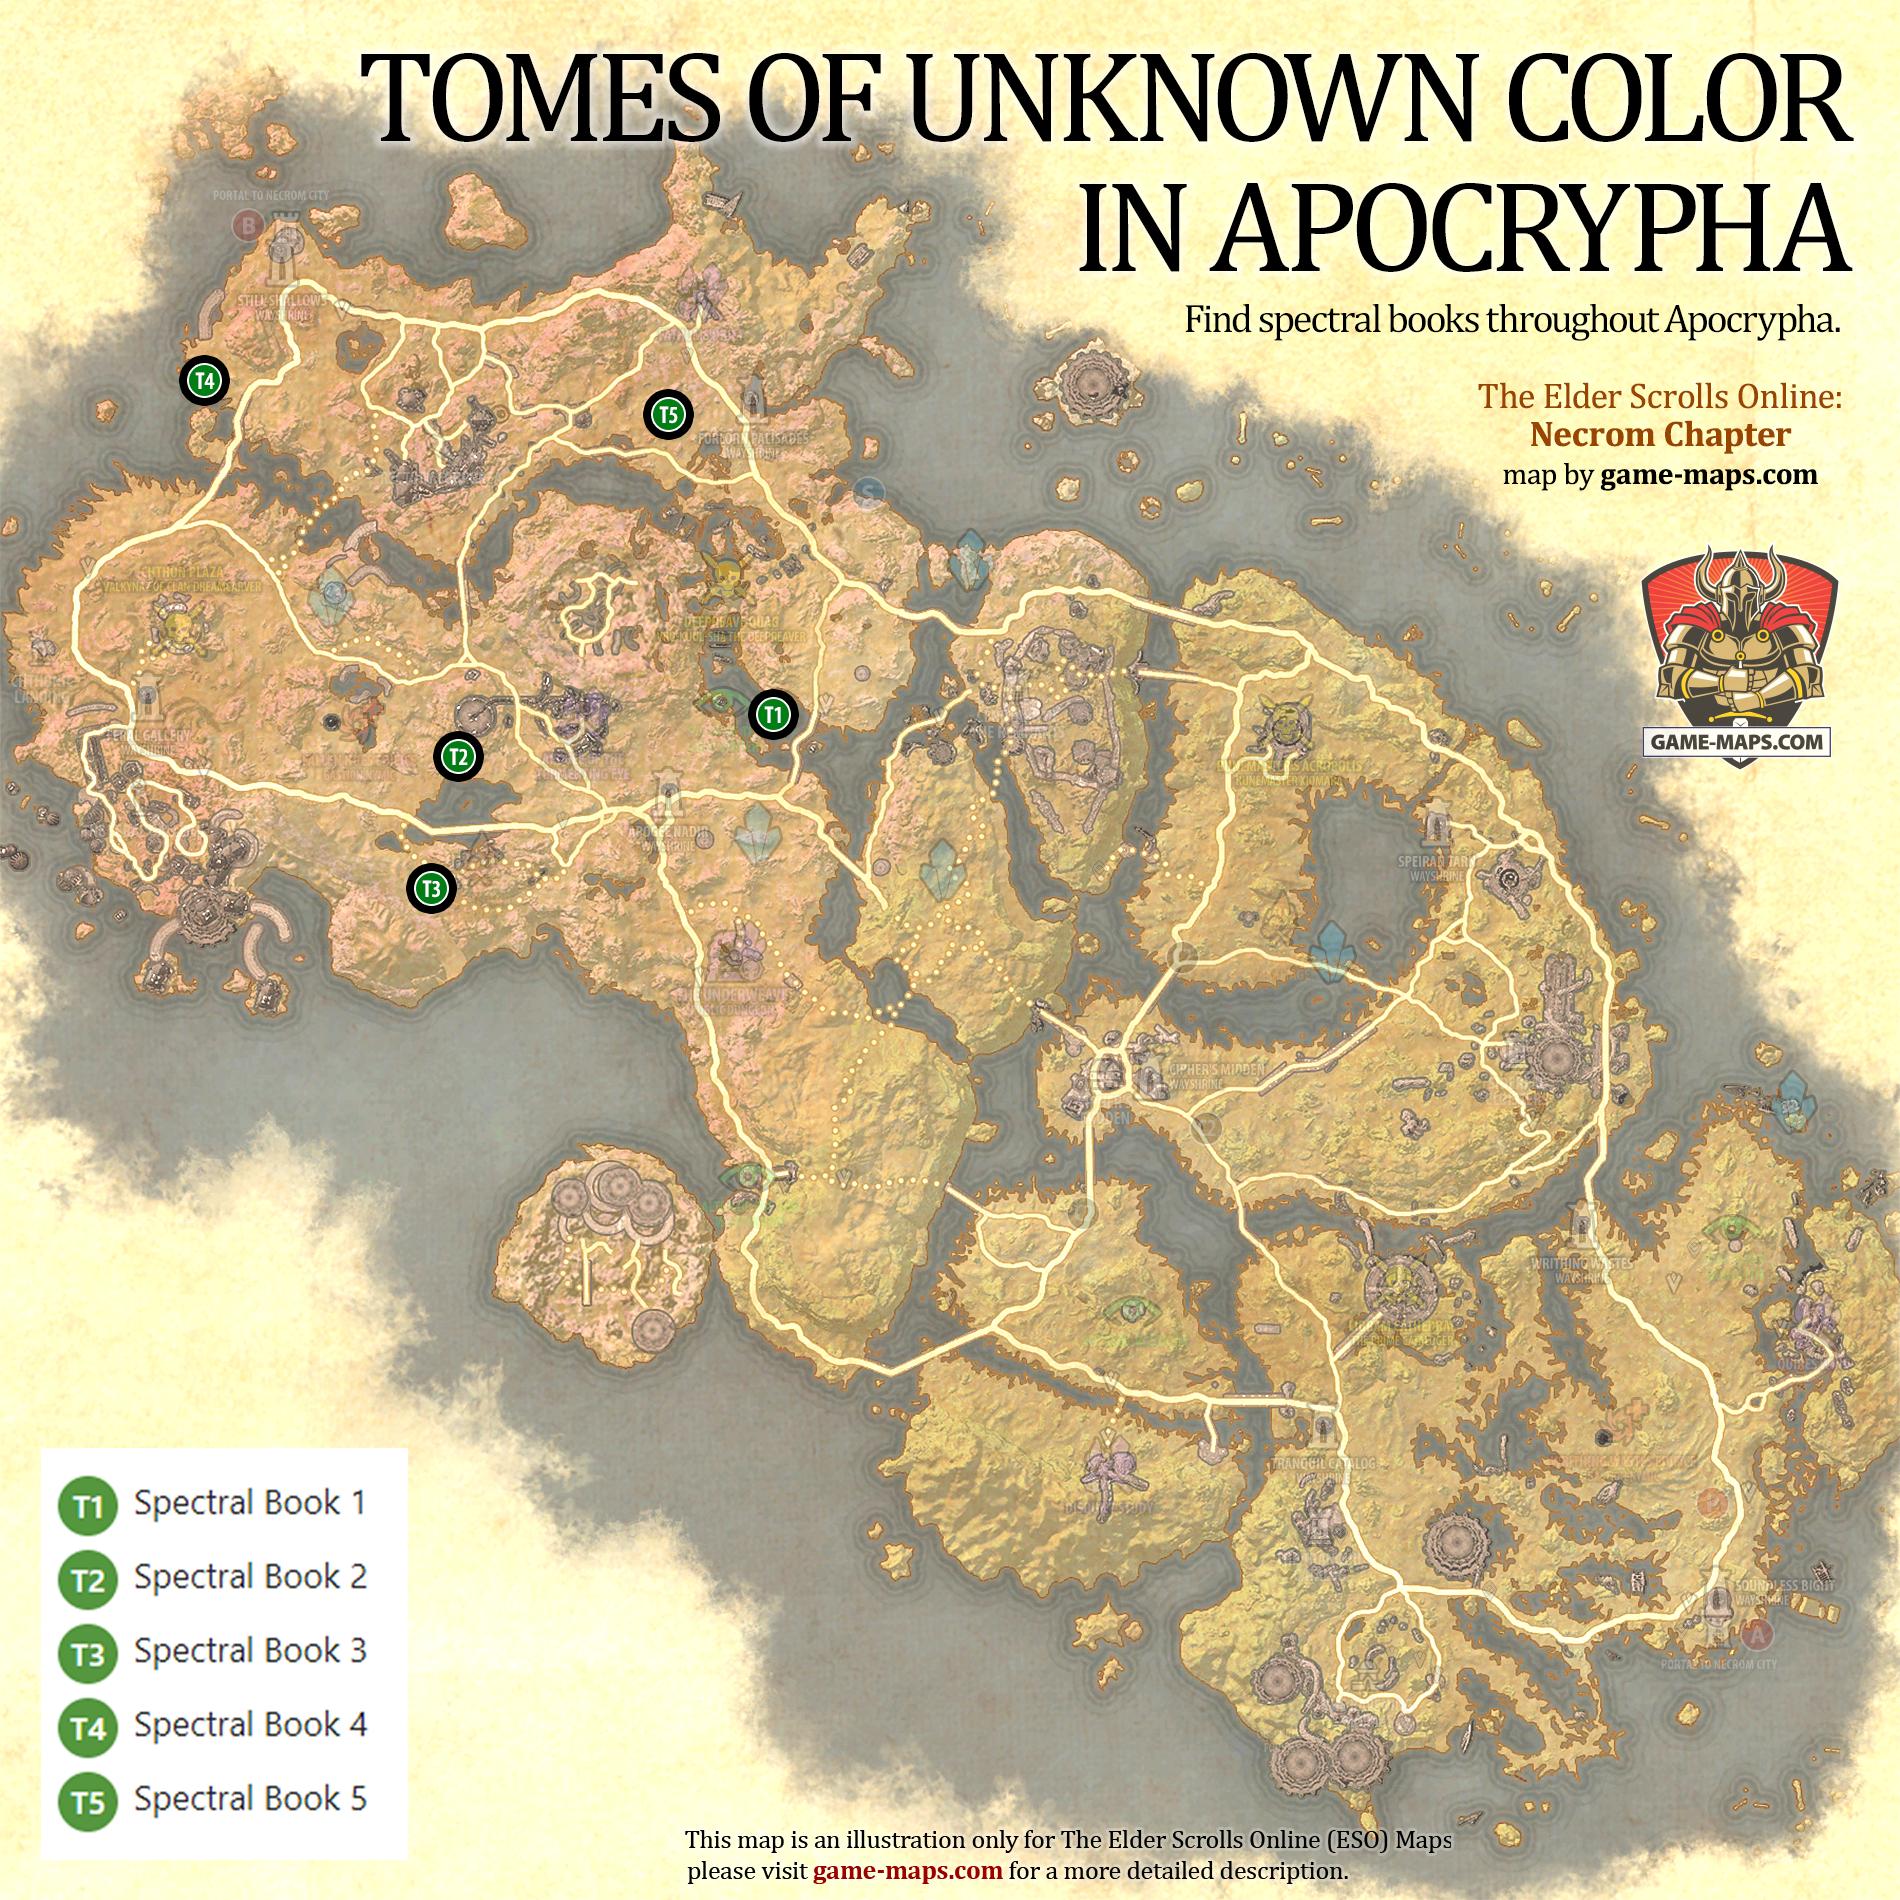 Tomes of Unknown Color in Apocrypha The Elder Scrolls Online (ESO)